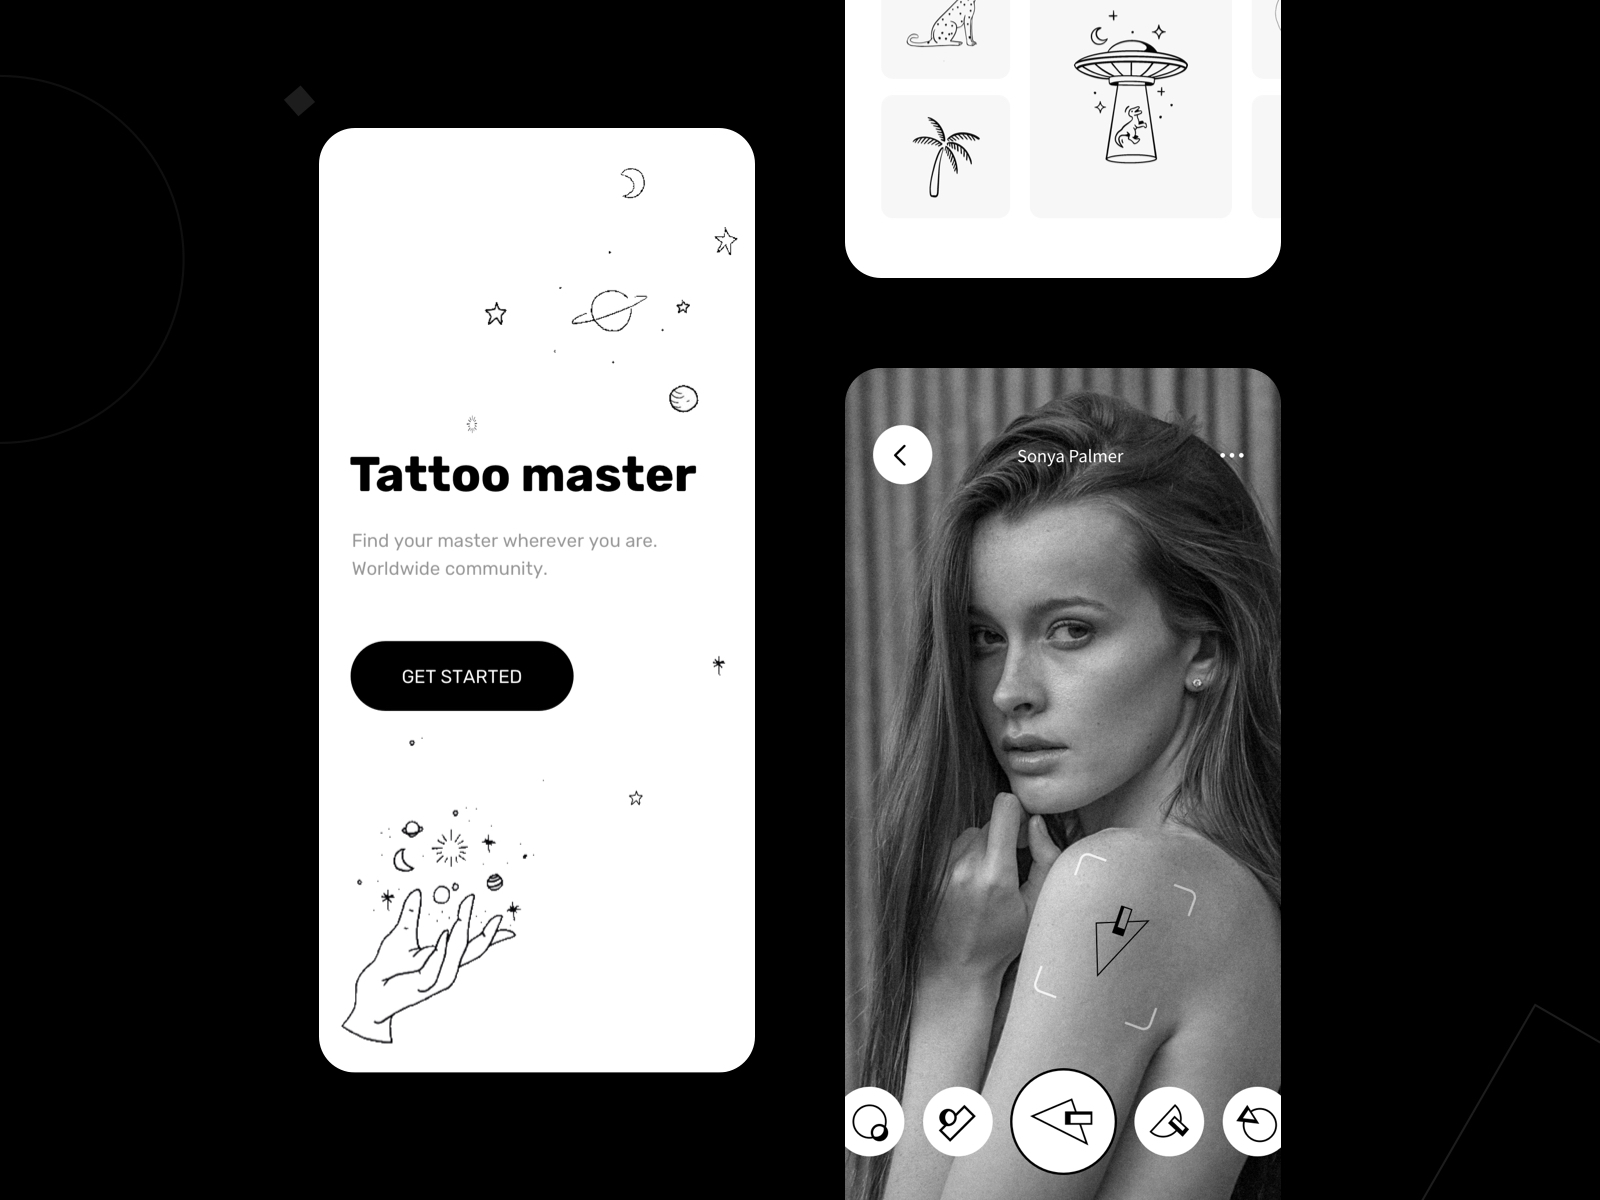 The Best Tattoo Design Apps and How to Create One For You? - TekRevol